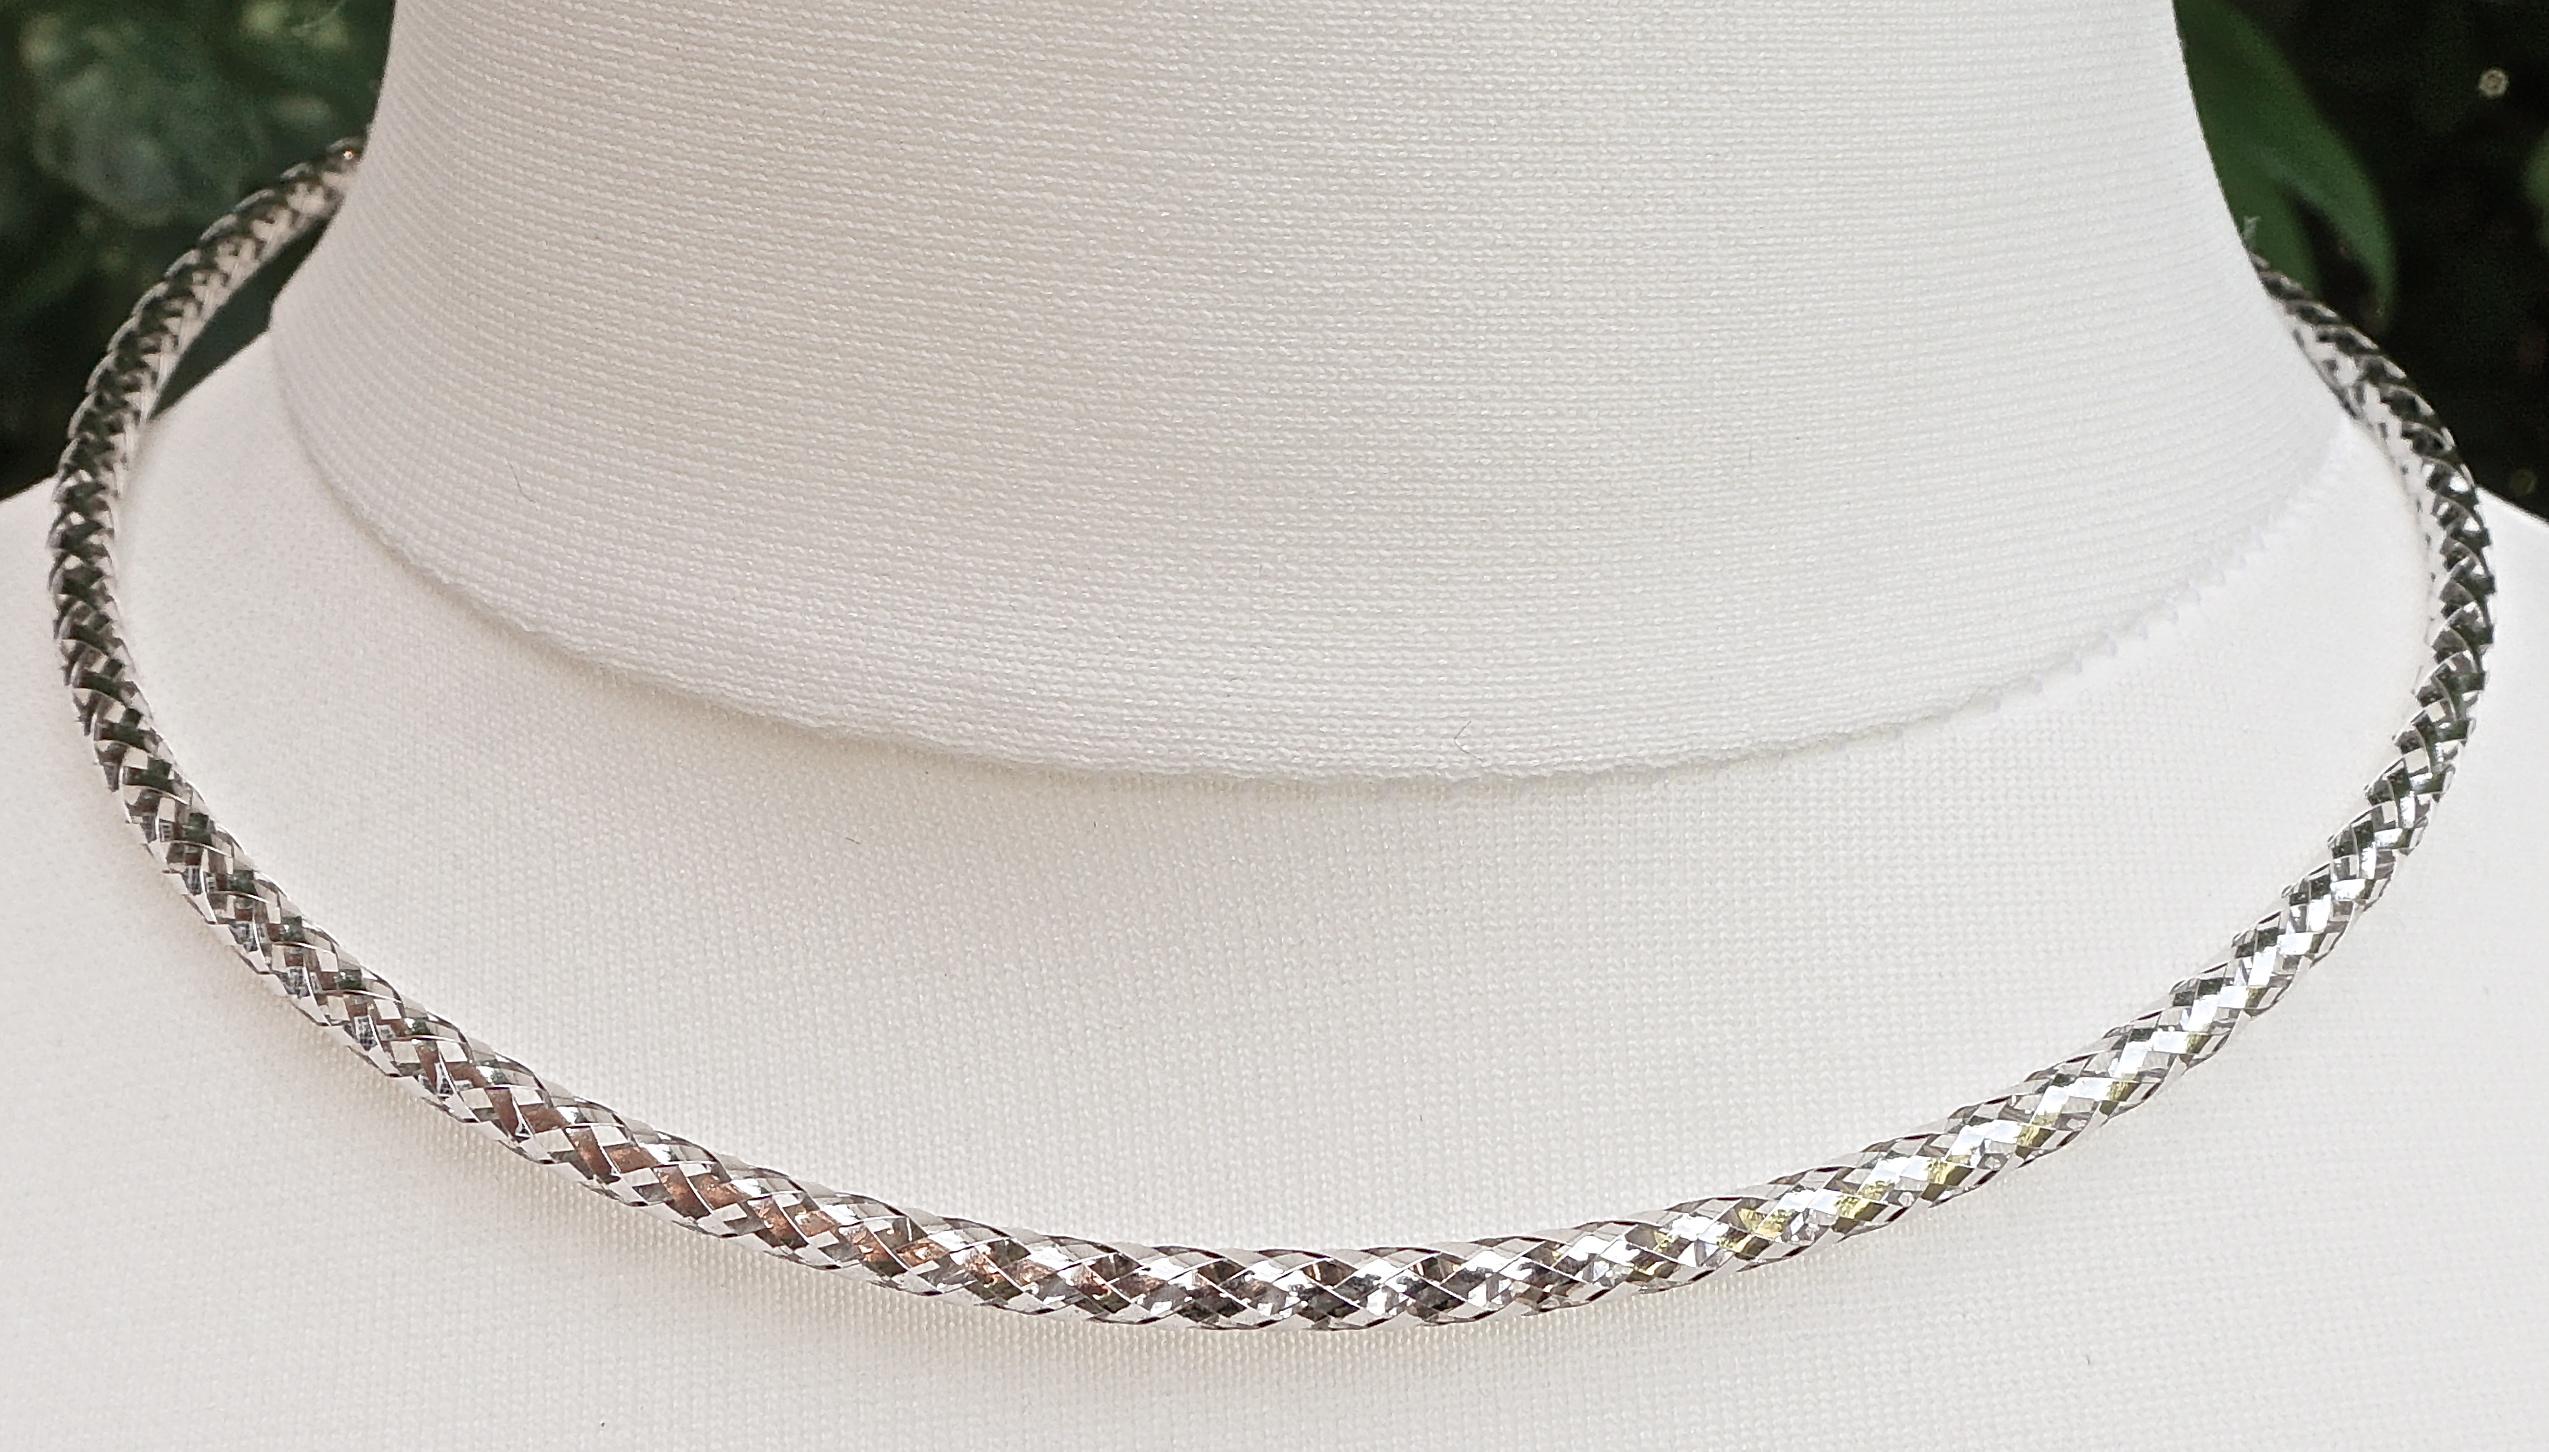 Milor 14K white gold round necklace stamped 14KT ITALY MILOR, featuring a lovely fancy criss-cross and diamond pattern. Length 42cm / 16.5 inches plus a 5cm / 2 inches extension, and the width is 3mm / .12 inch. The necklace is hollow and